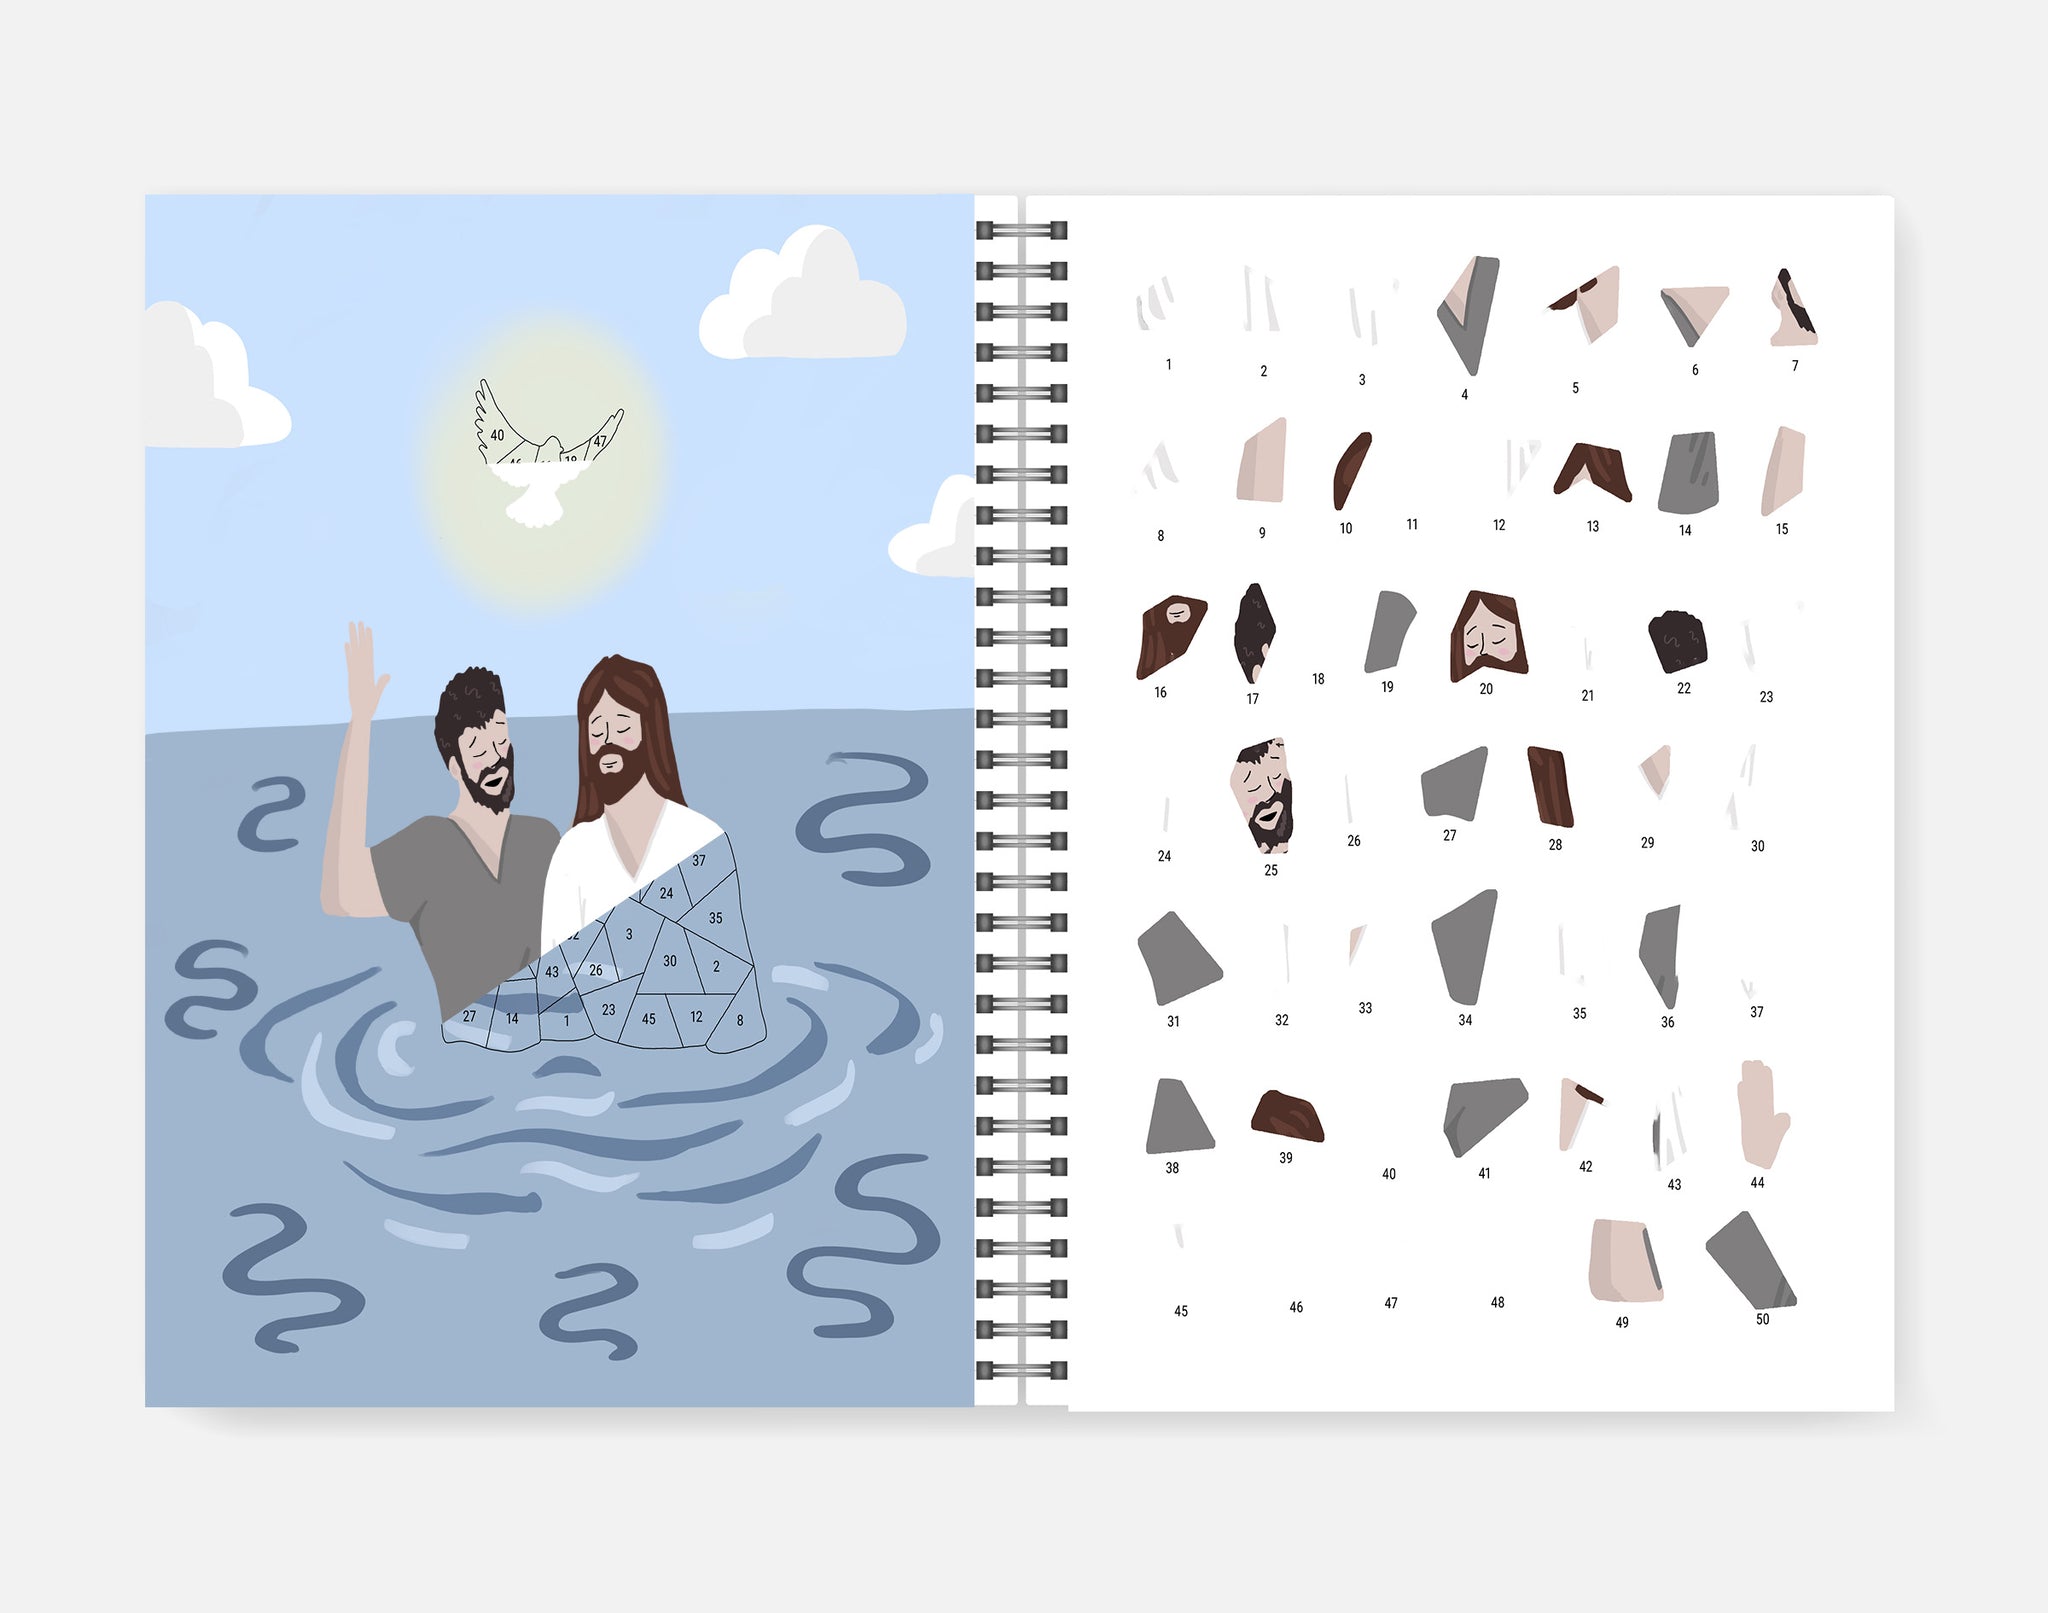 Sticker By Number Book - New Testament – LDS Paint By Numbers